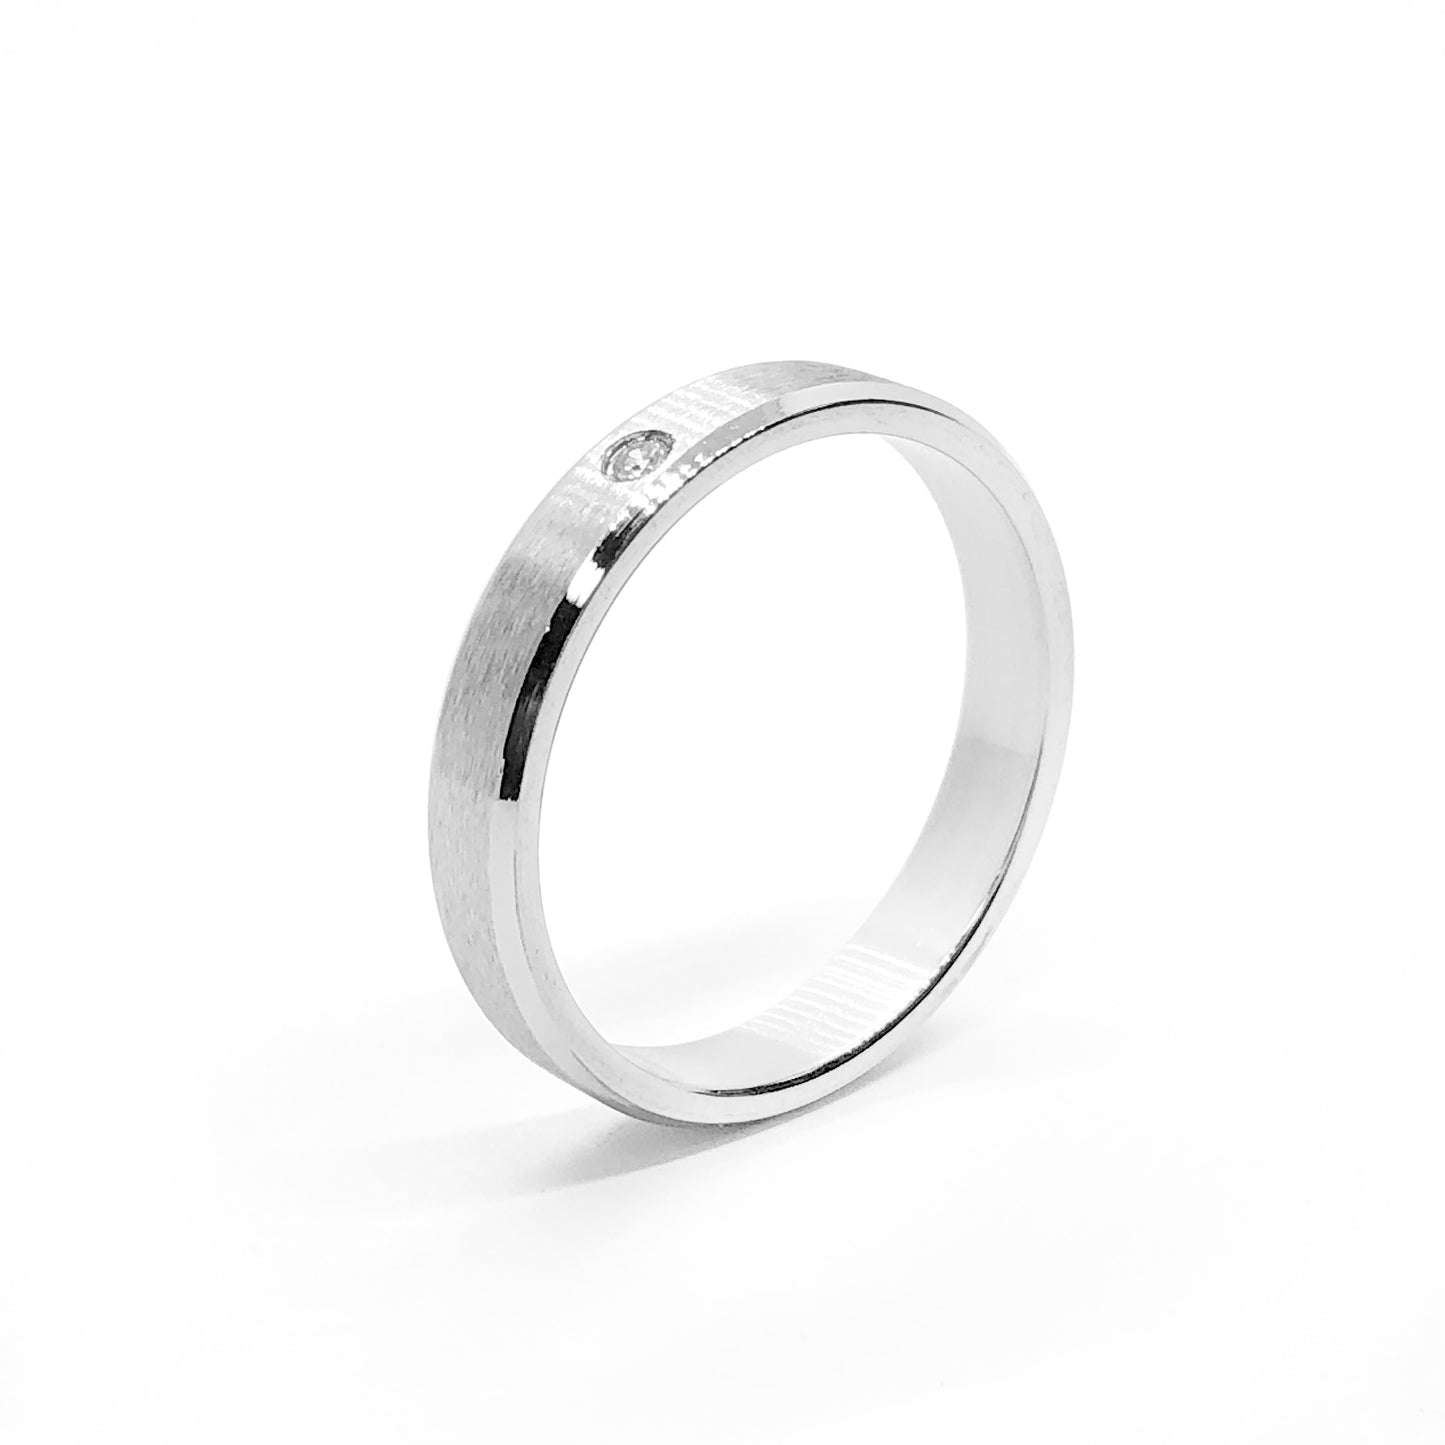 Brushed Satin Finish Stainless Steel CZ Ring